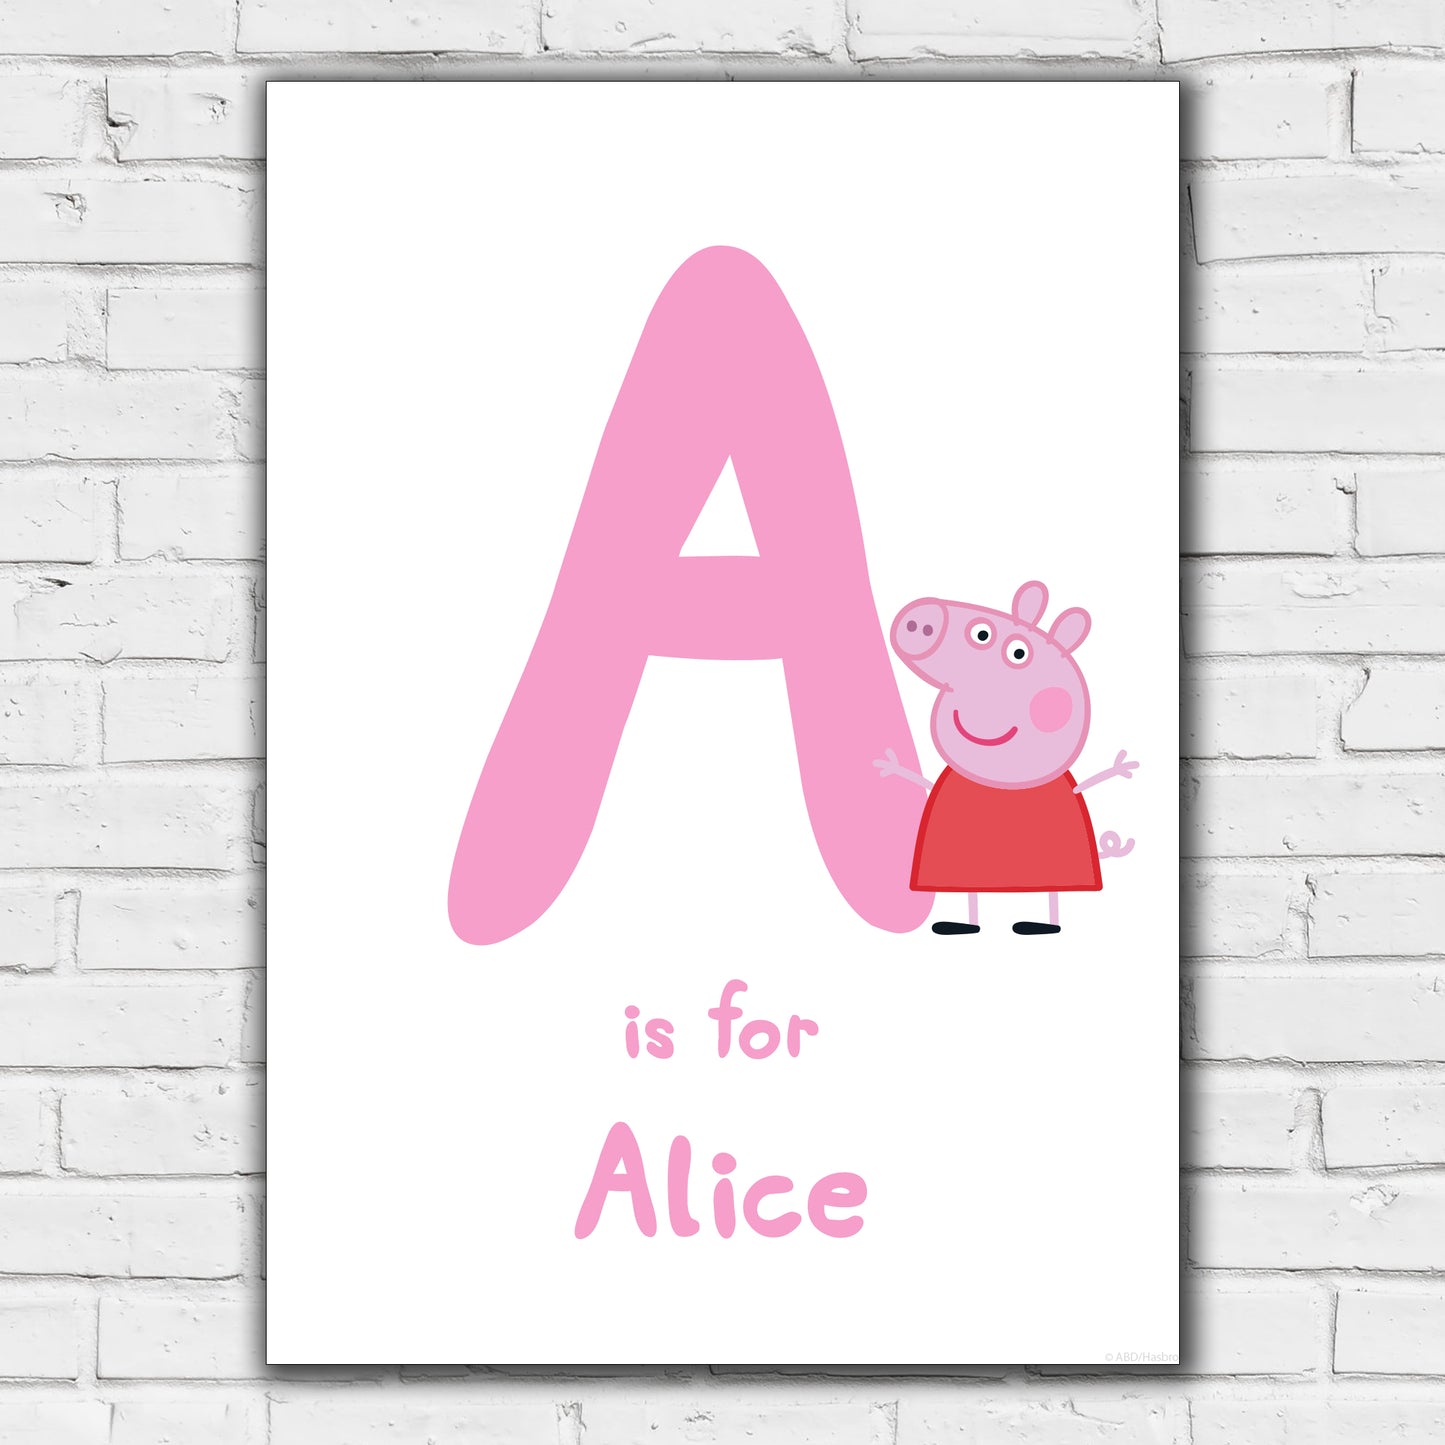 Peppa Pig Print - Peppa Letter and Personalised Name Pink Poster Wall Art